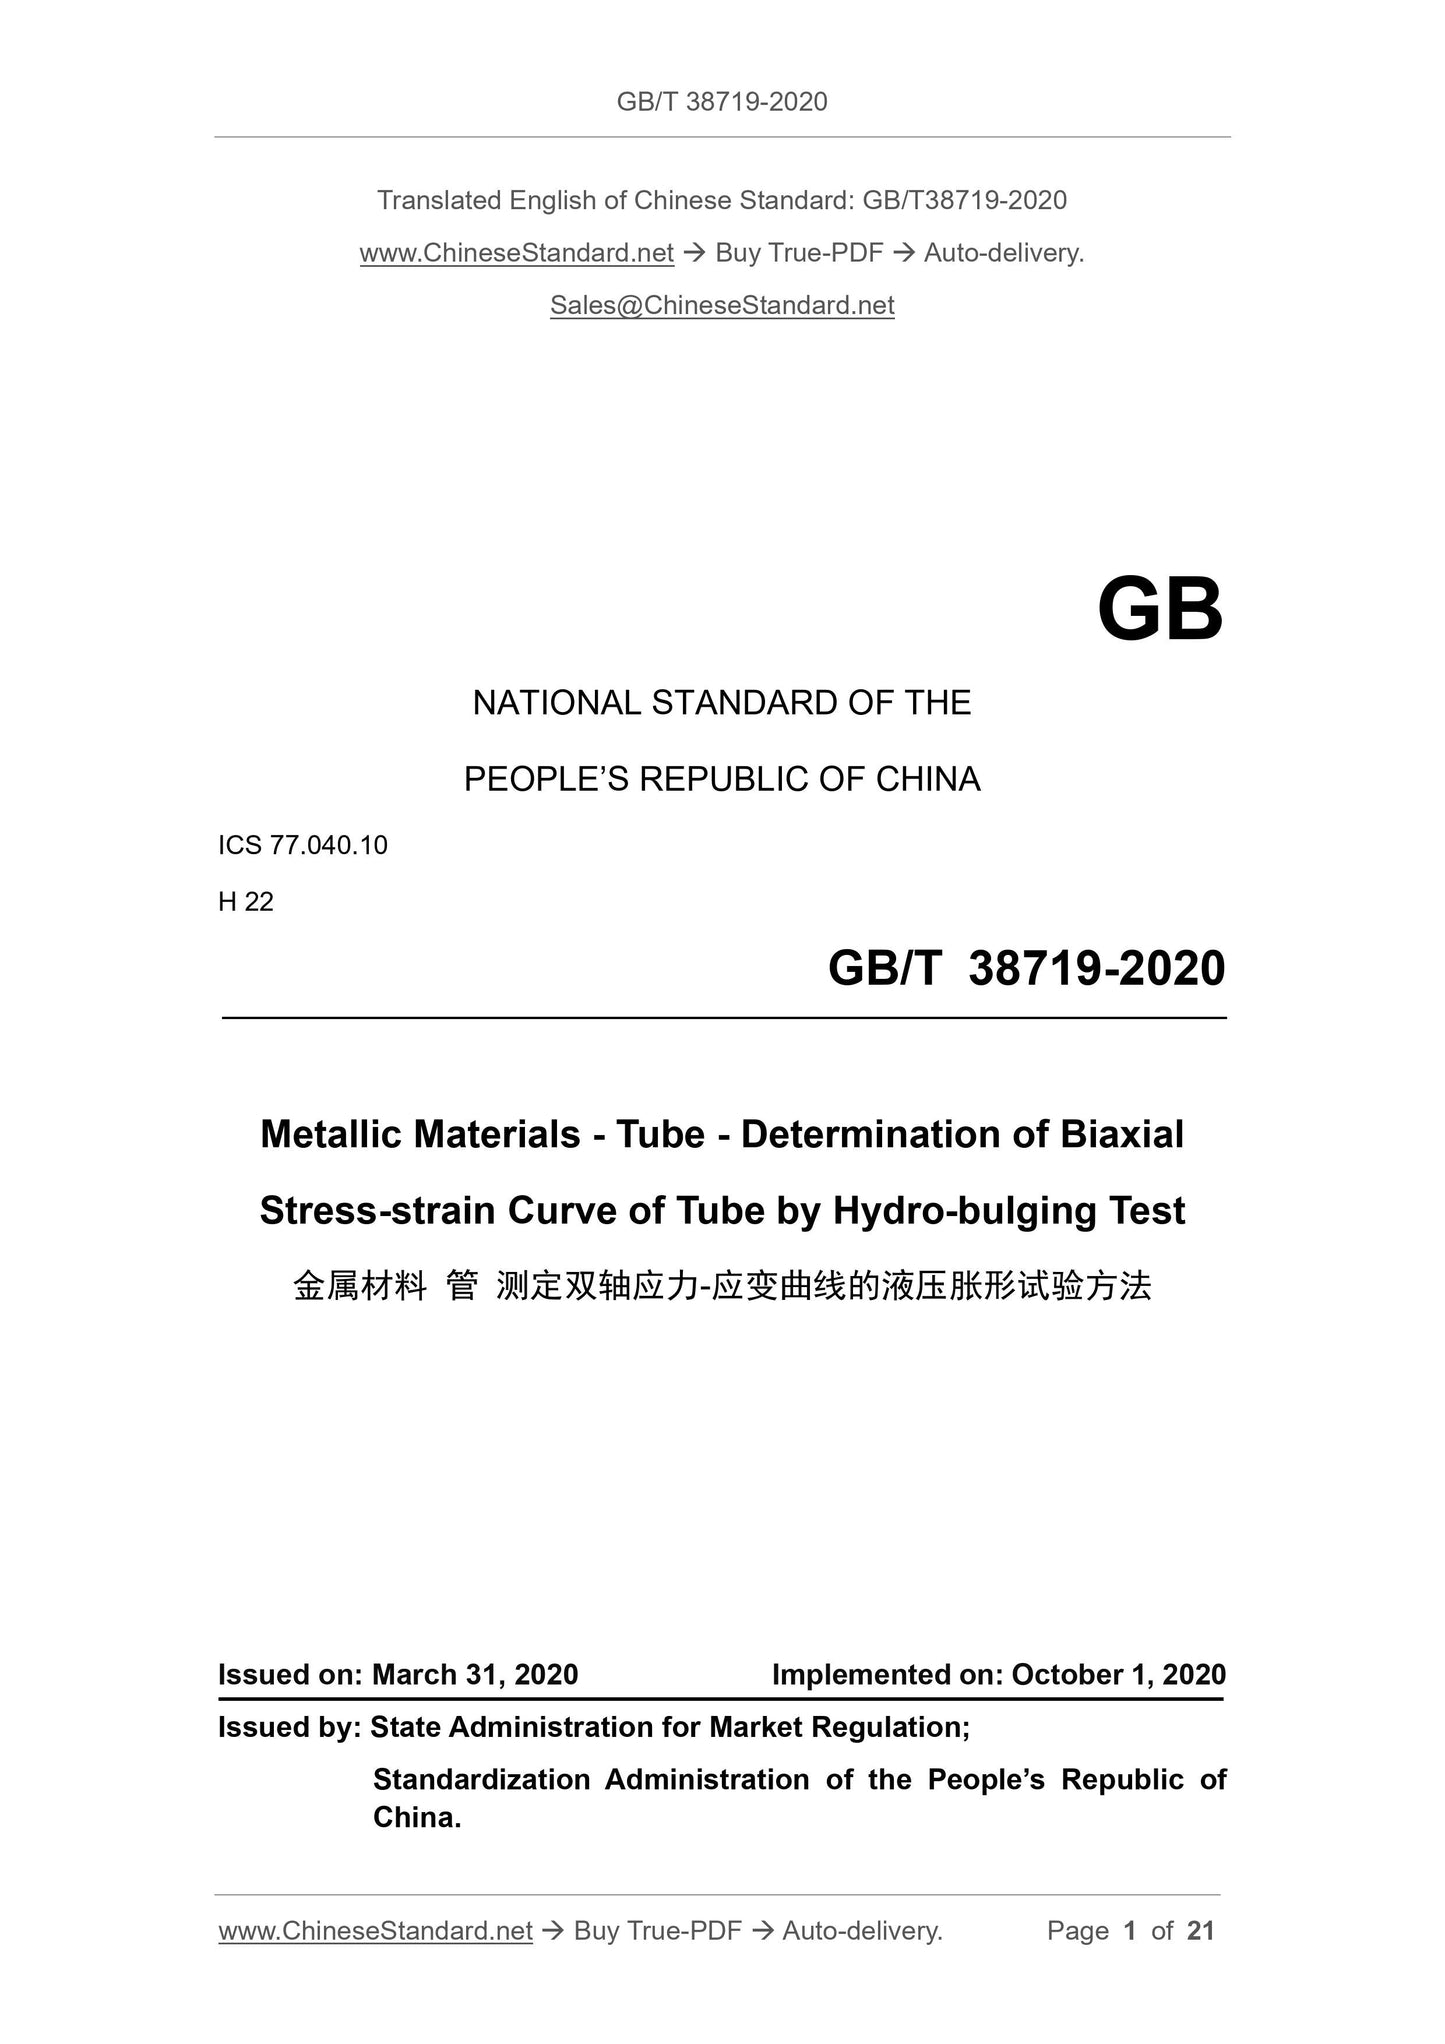 GB/T 38719-2020 Page 1